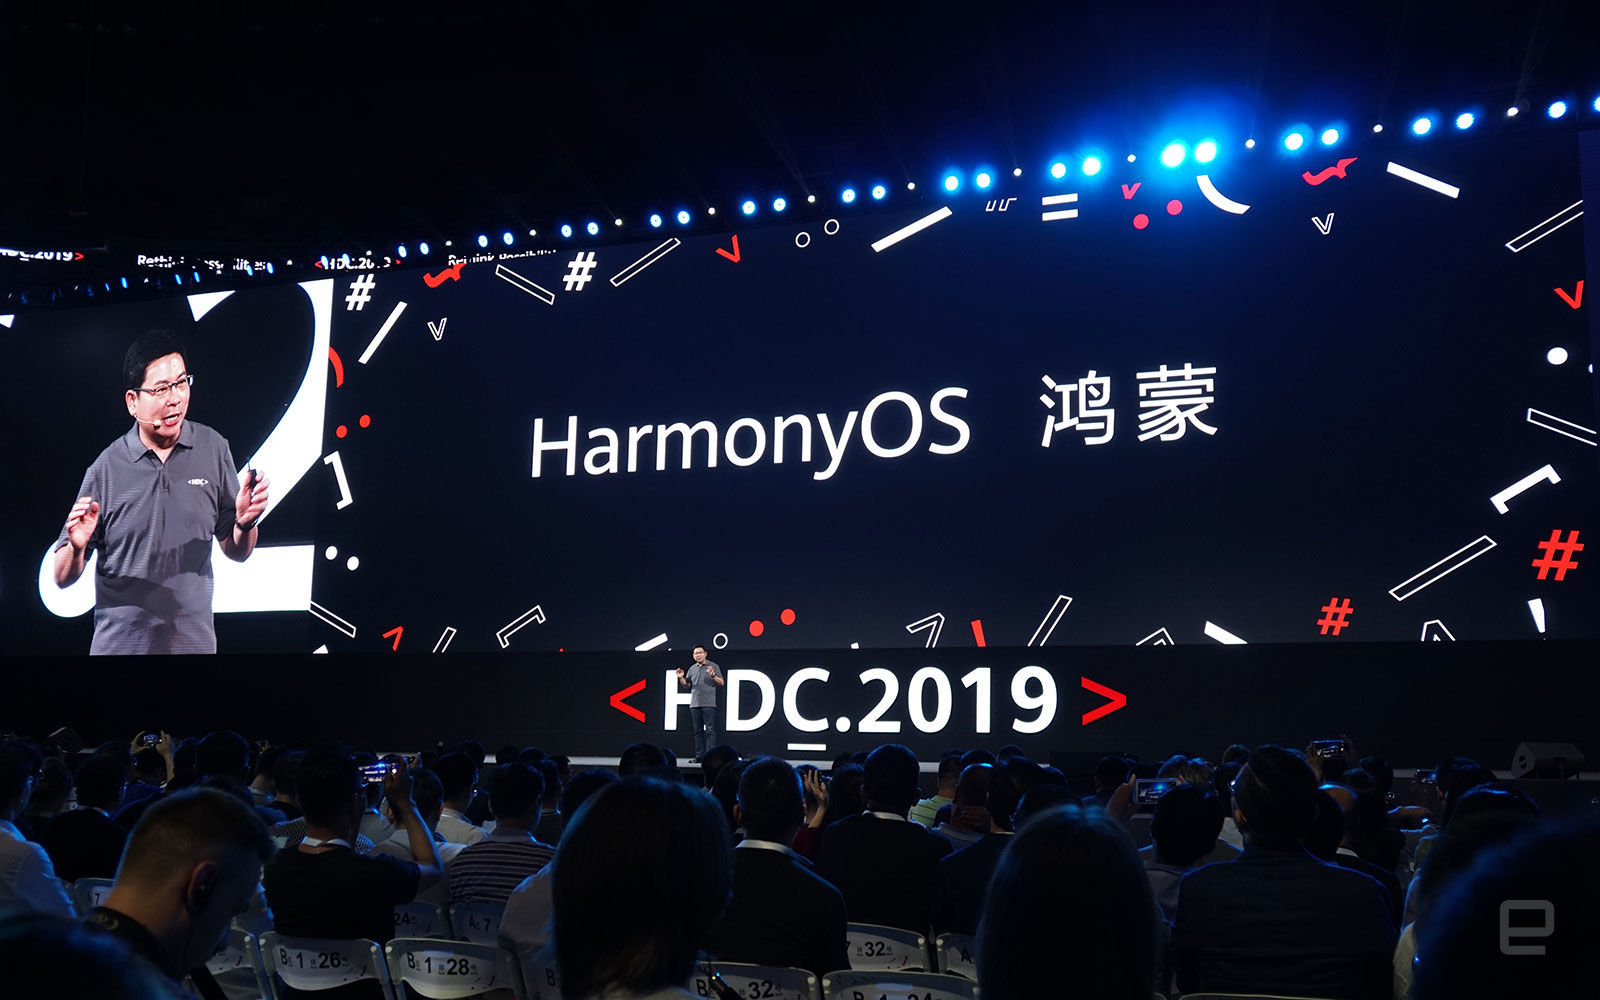 Huawei’s Alternative To Android OS, HarmonyOS, Has Been Unveiled